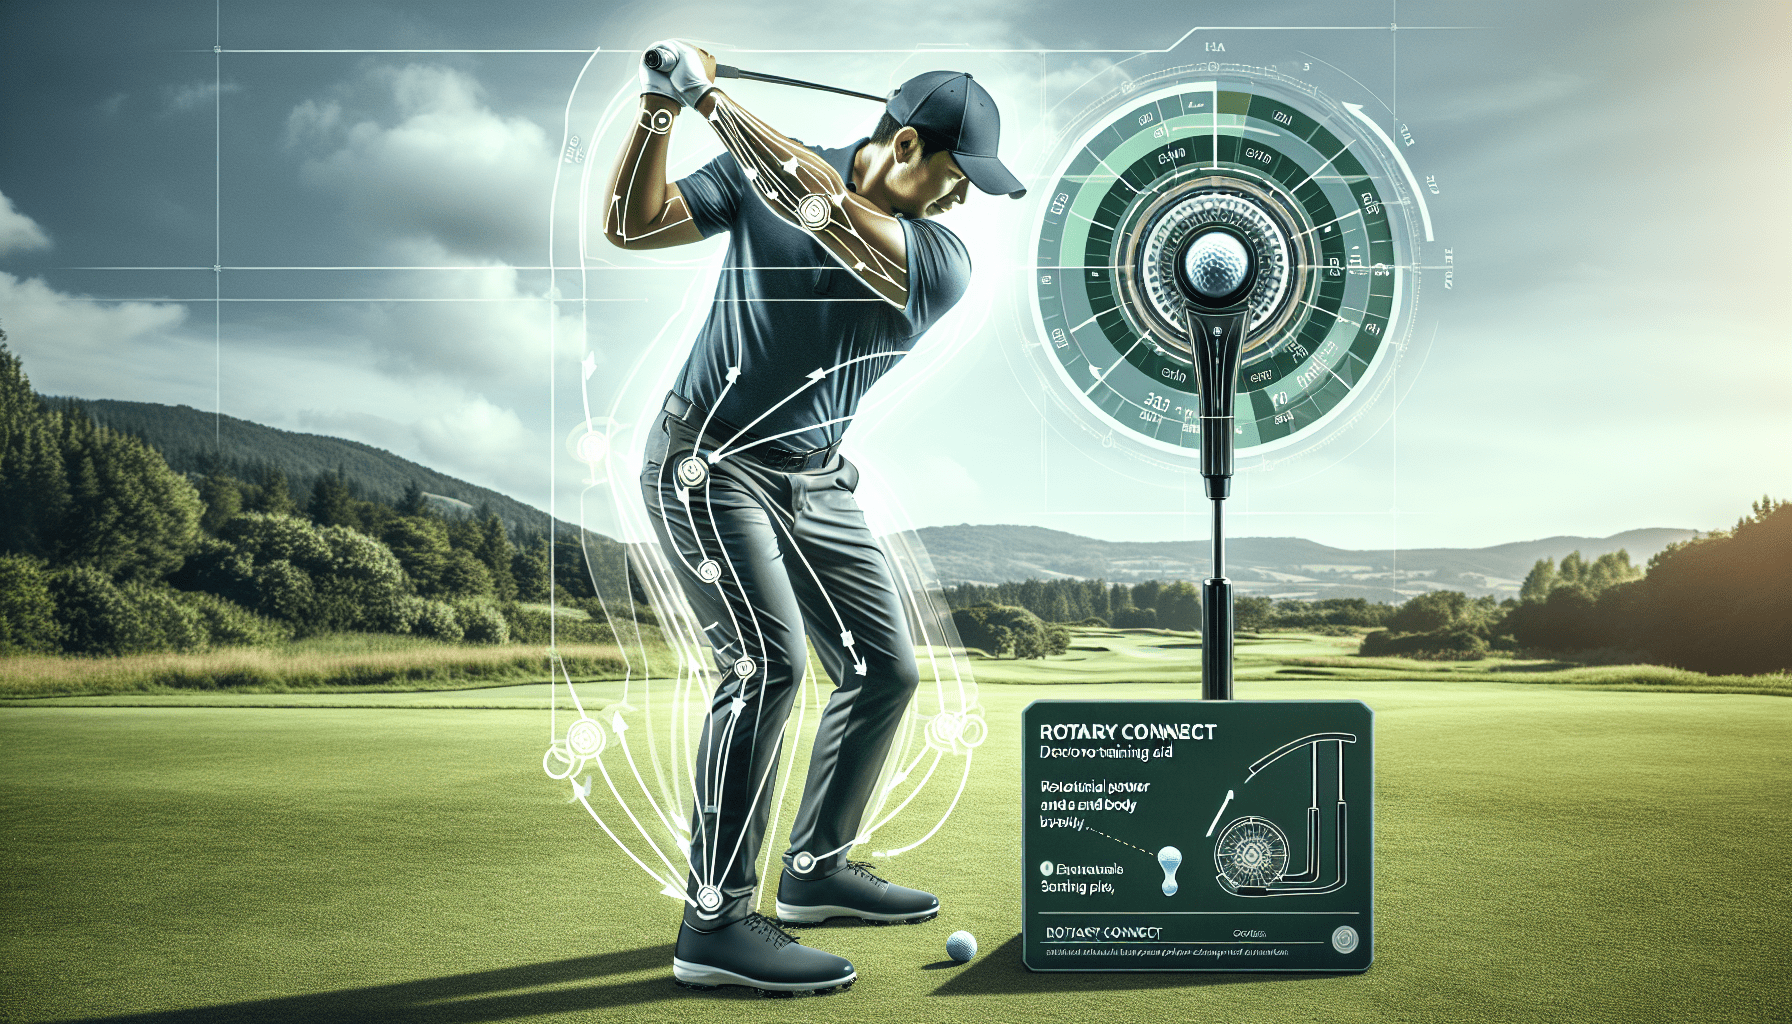 Improve Your Golf Swing with the Rotary Connect Training Aid